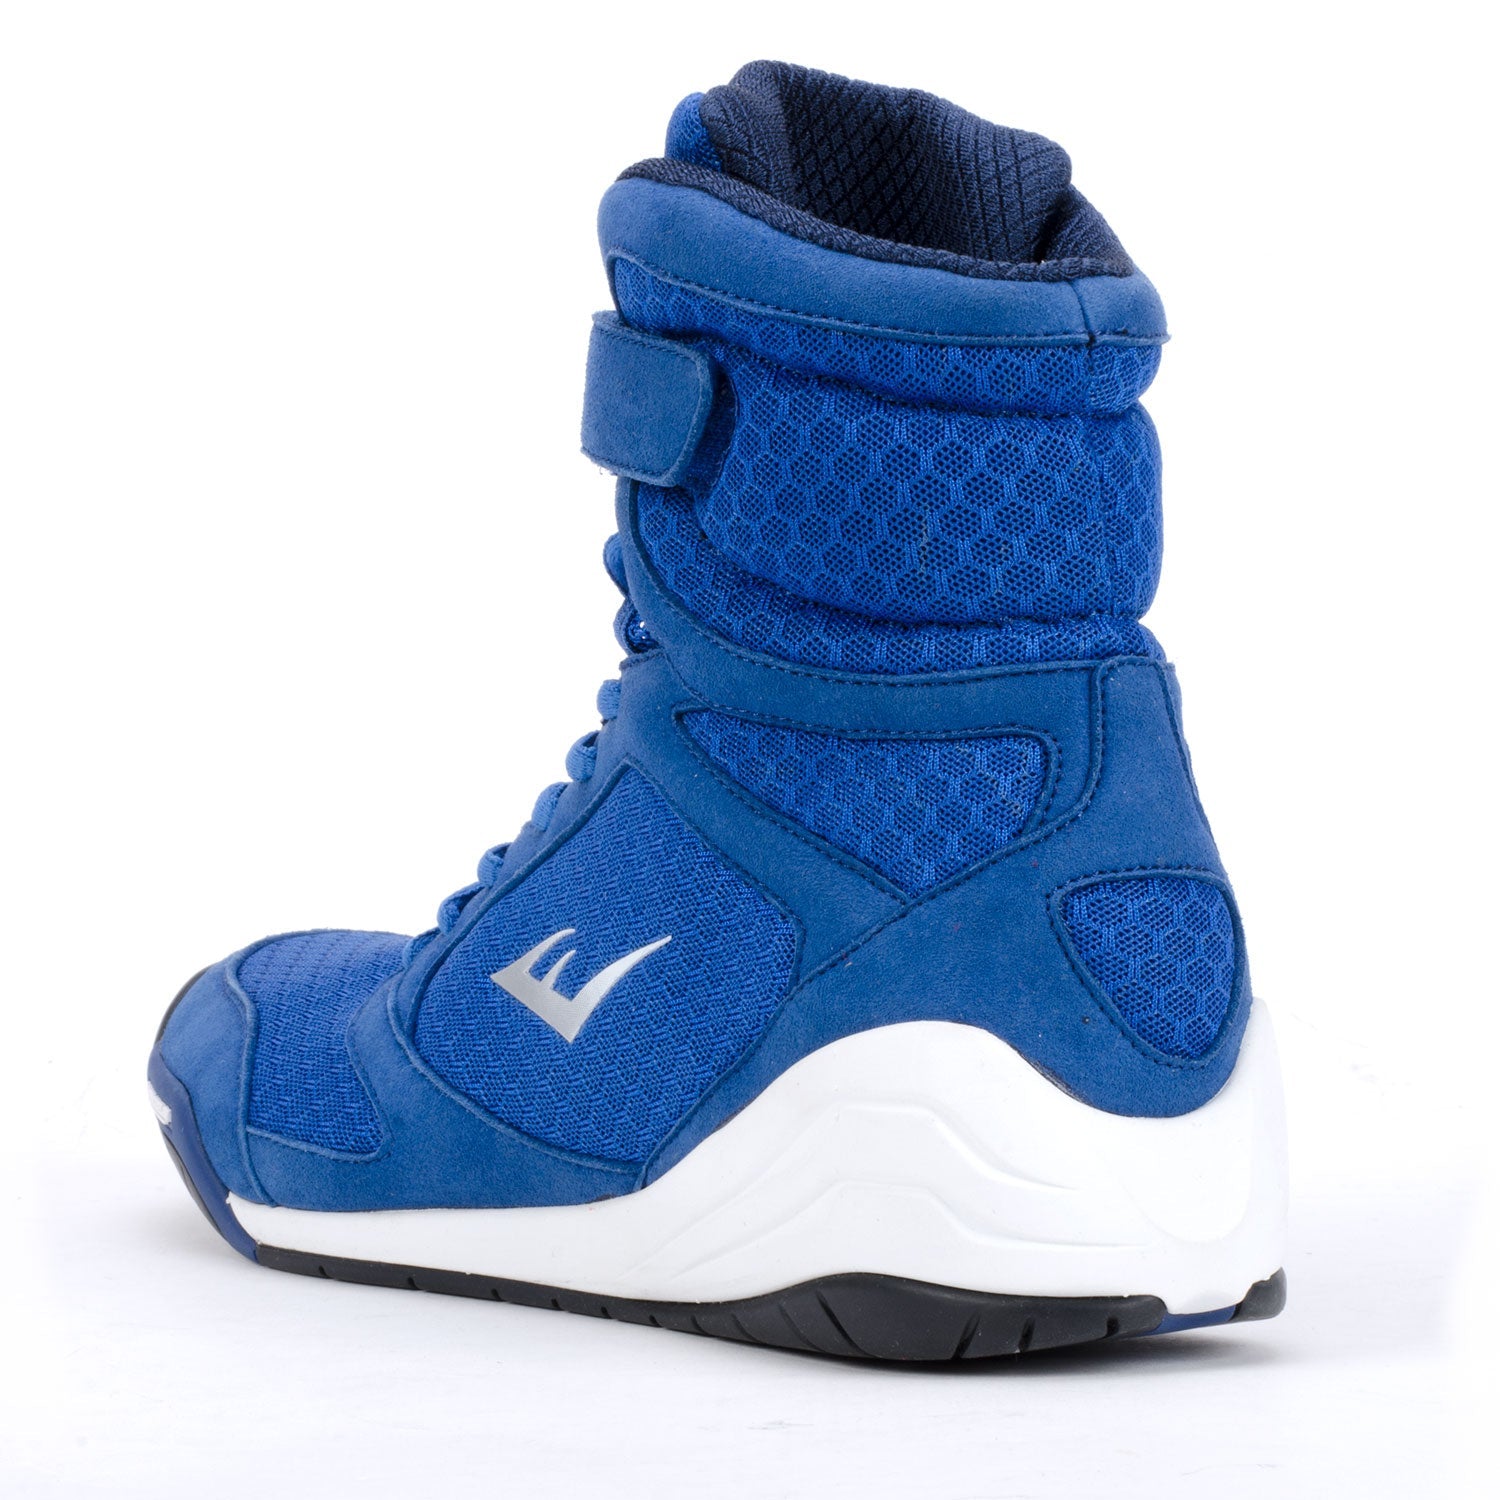 everlast new elite high top boxing shoes